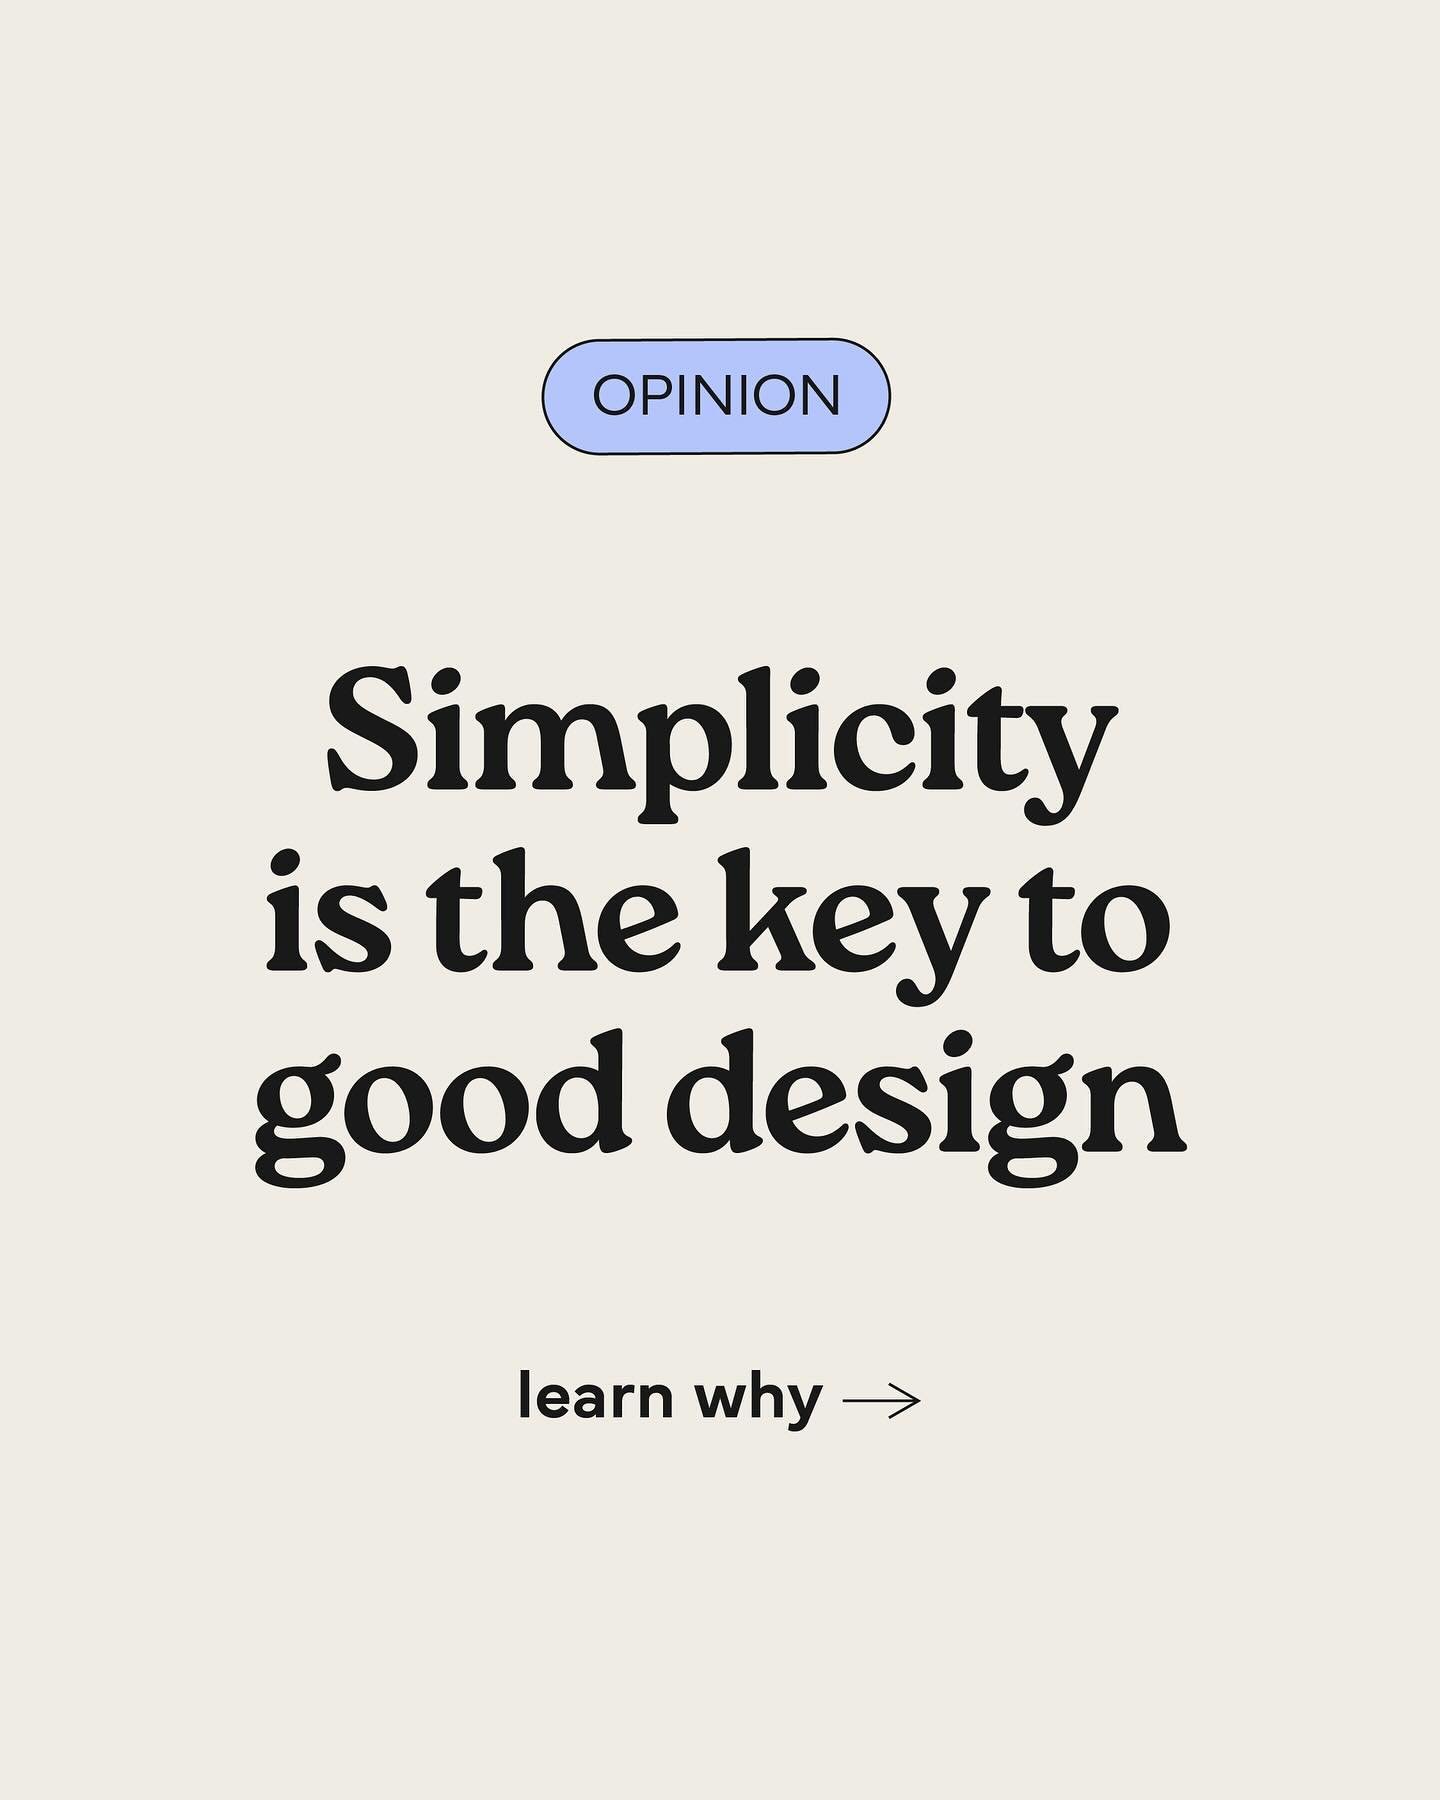 Why this is the design style I favour 😊 
.
.
.
#minimalist #minimalism #simple #simplicity #cleandesign #designer #graphicdesigner #graphicdesign #solobusiness #femalefounder #branddesigner #brandingforwomen